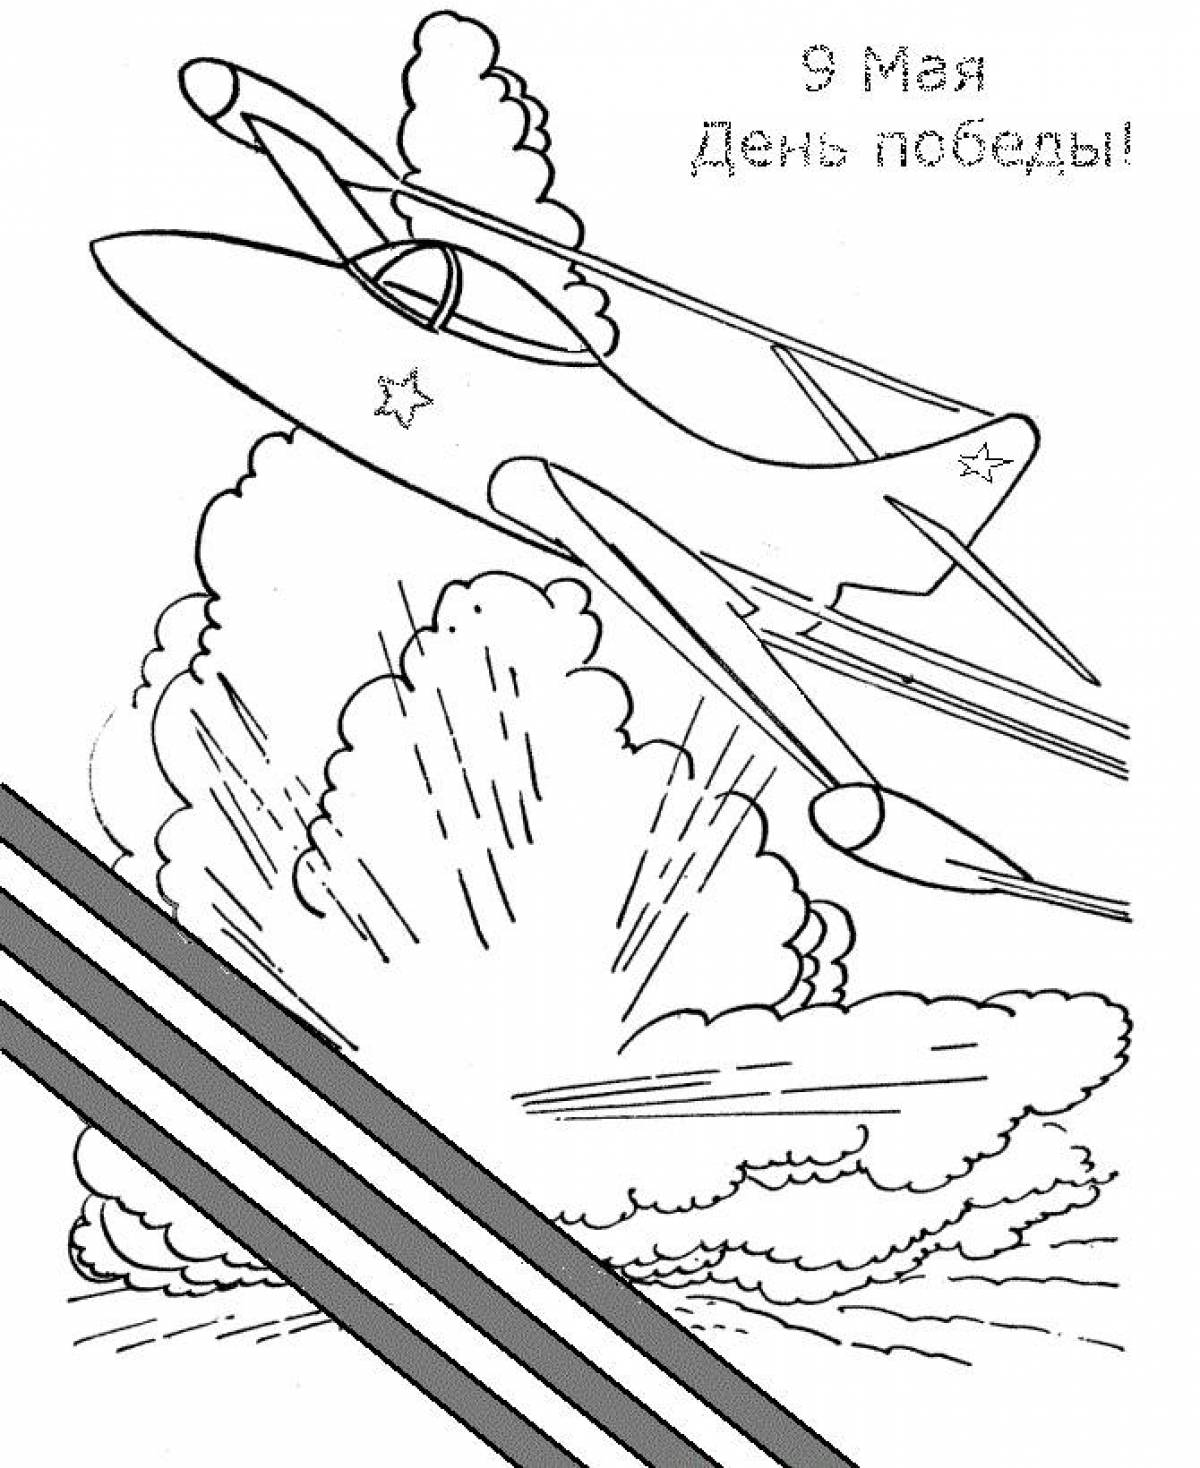 Victory day coloring book download